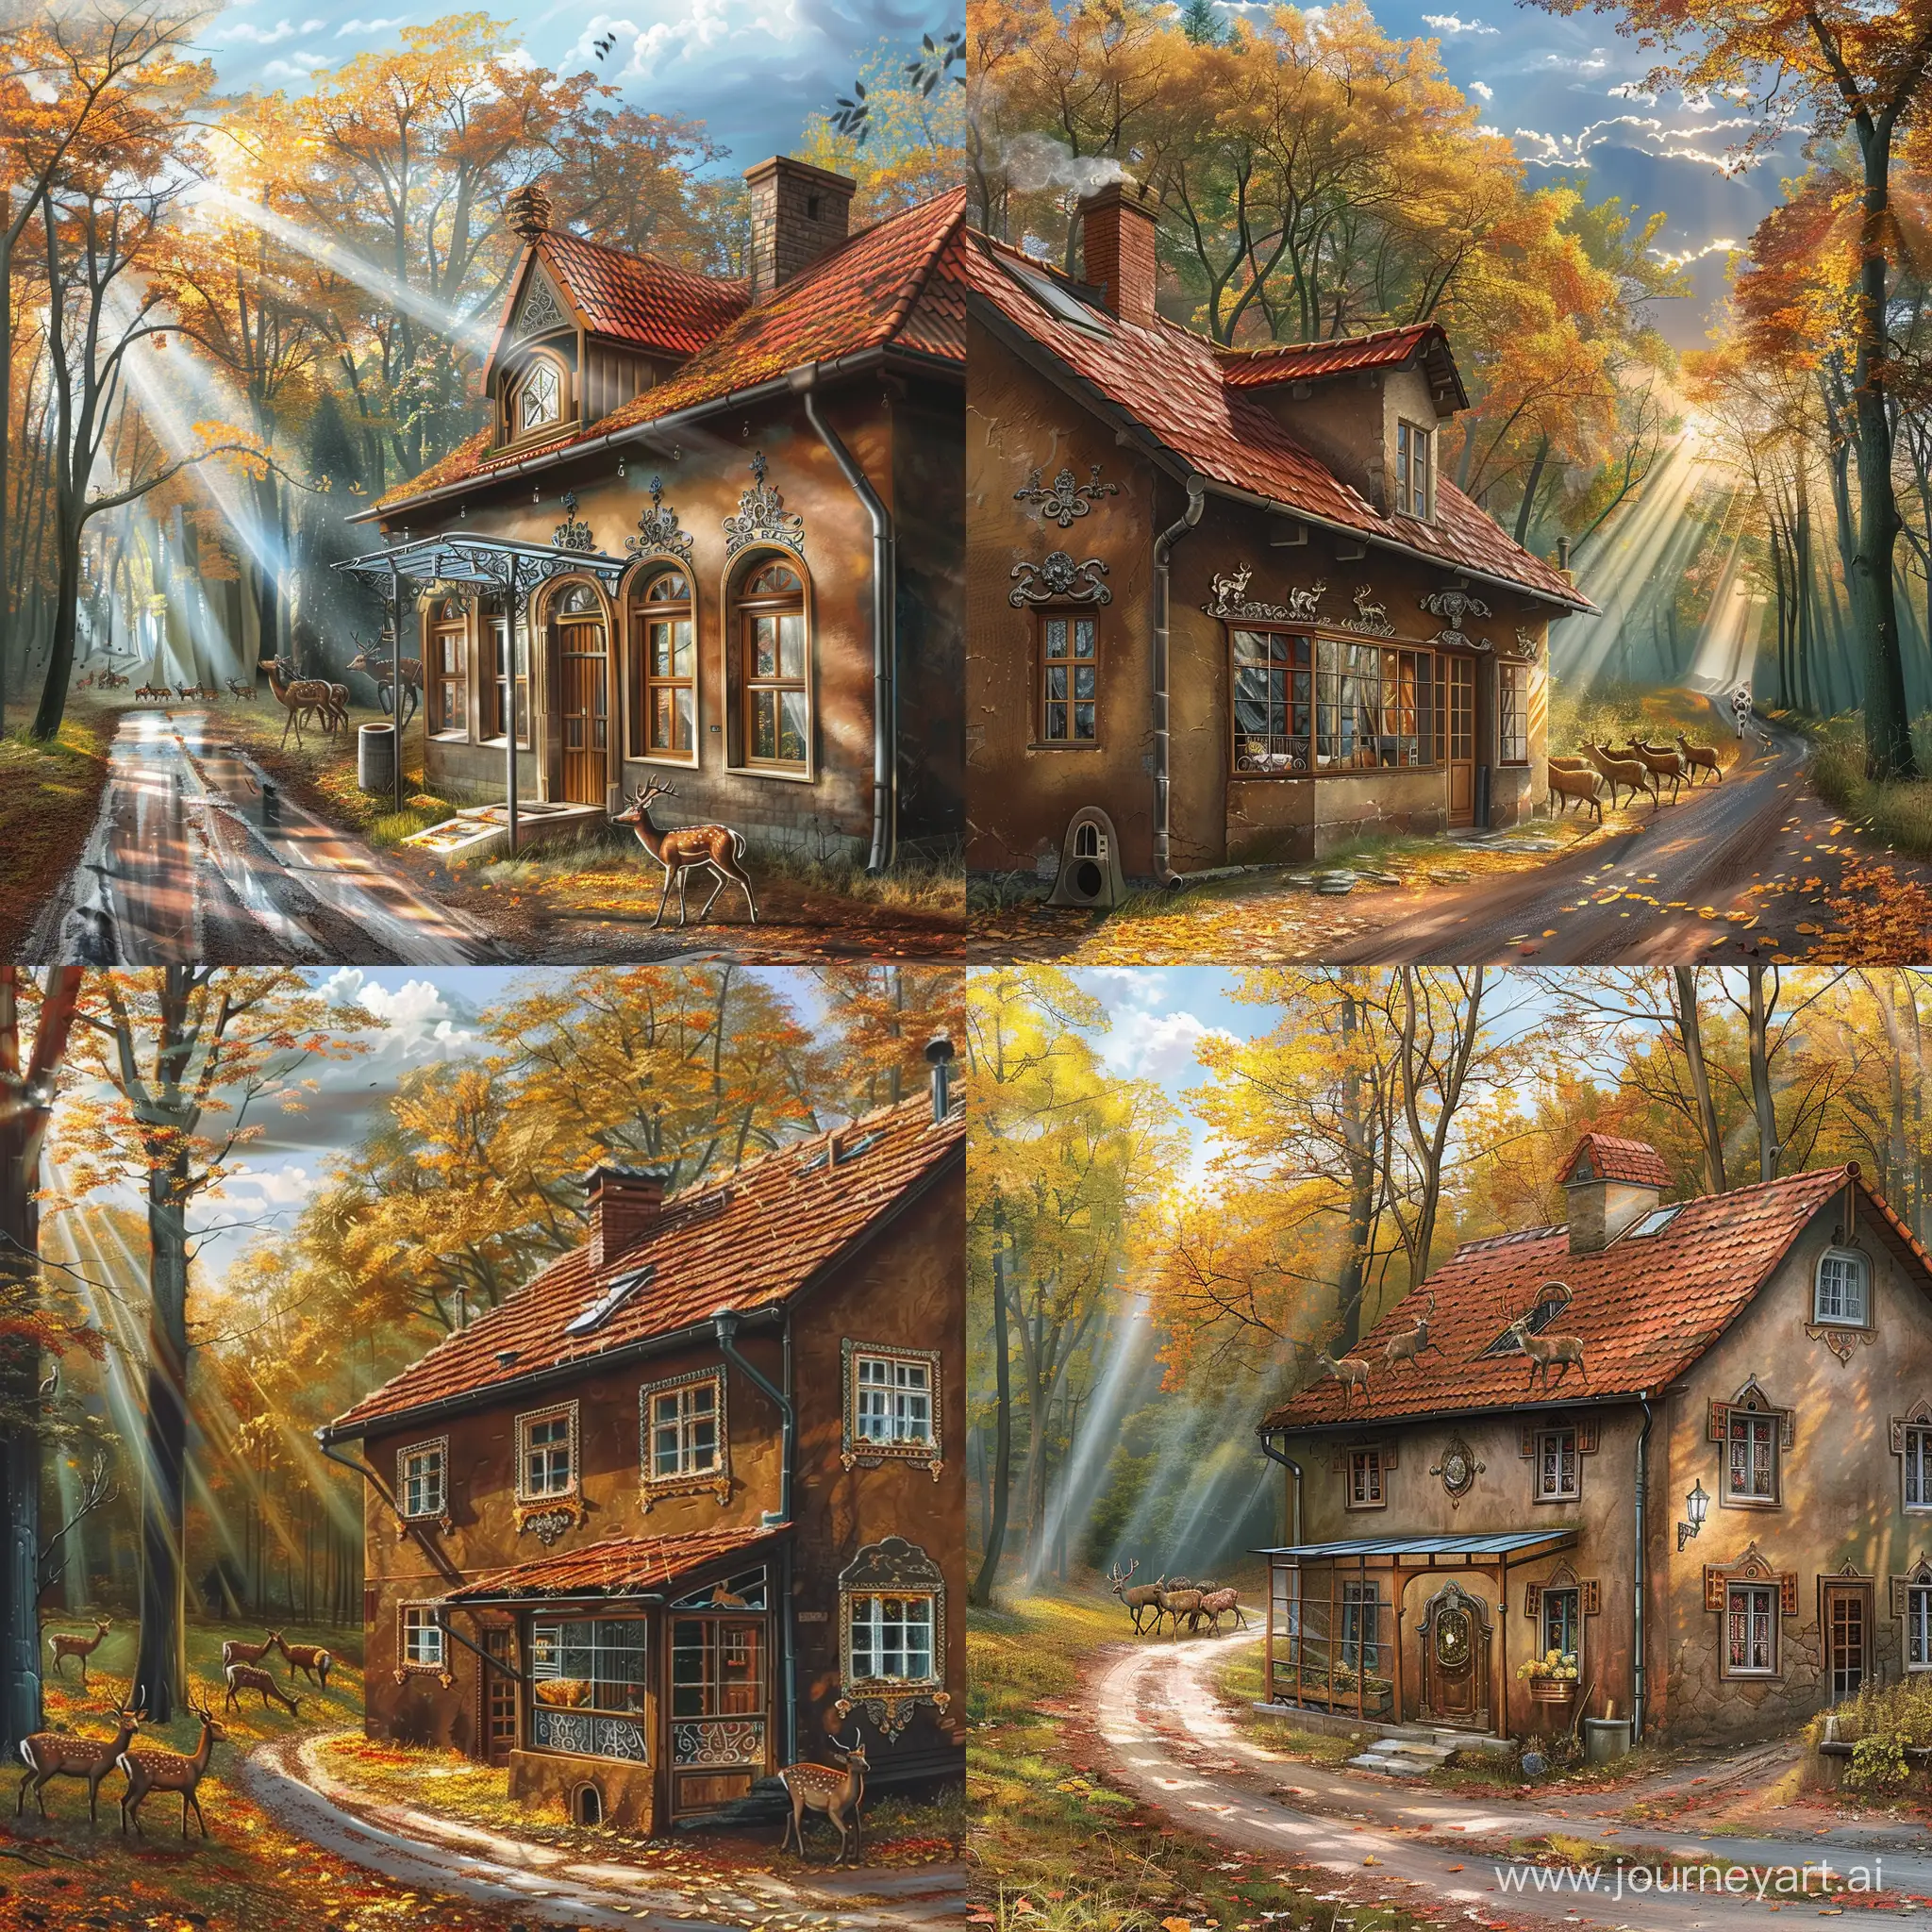 Autumn-Forest-Retreat-Tranquil-Rural-House-with-Ornate-Decor-and-Deer-Herd